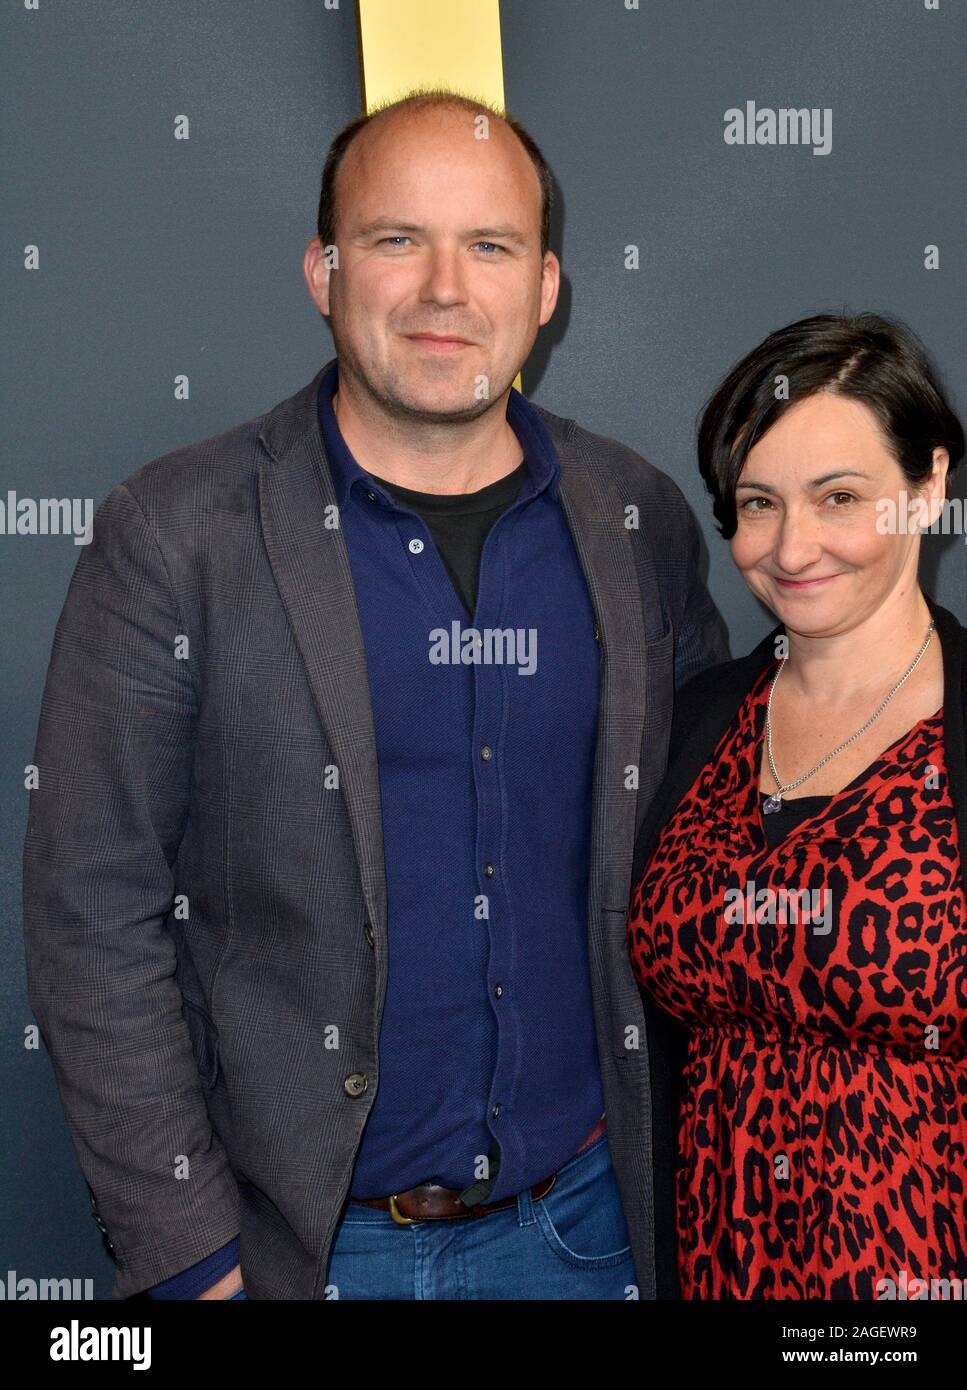 Los Angeles, USA. 18th Dec, 2019. Rory Kinnear & Pandora Colin at the premiere of '1917' at the TCL Chinese Theatre. Picture Credit: Paul Smith/Alamy Live News Stock Photo